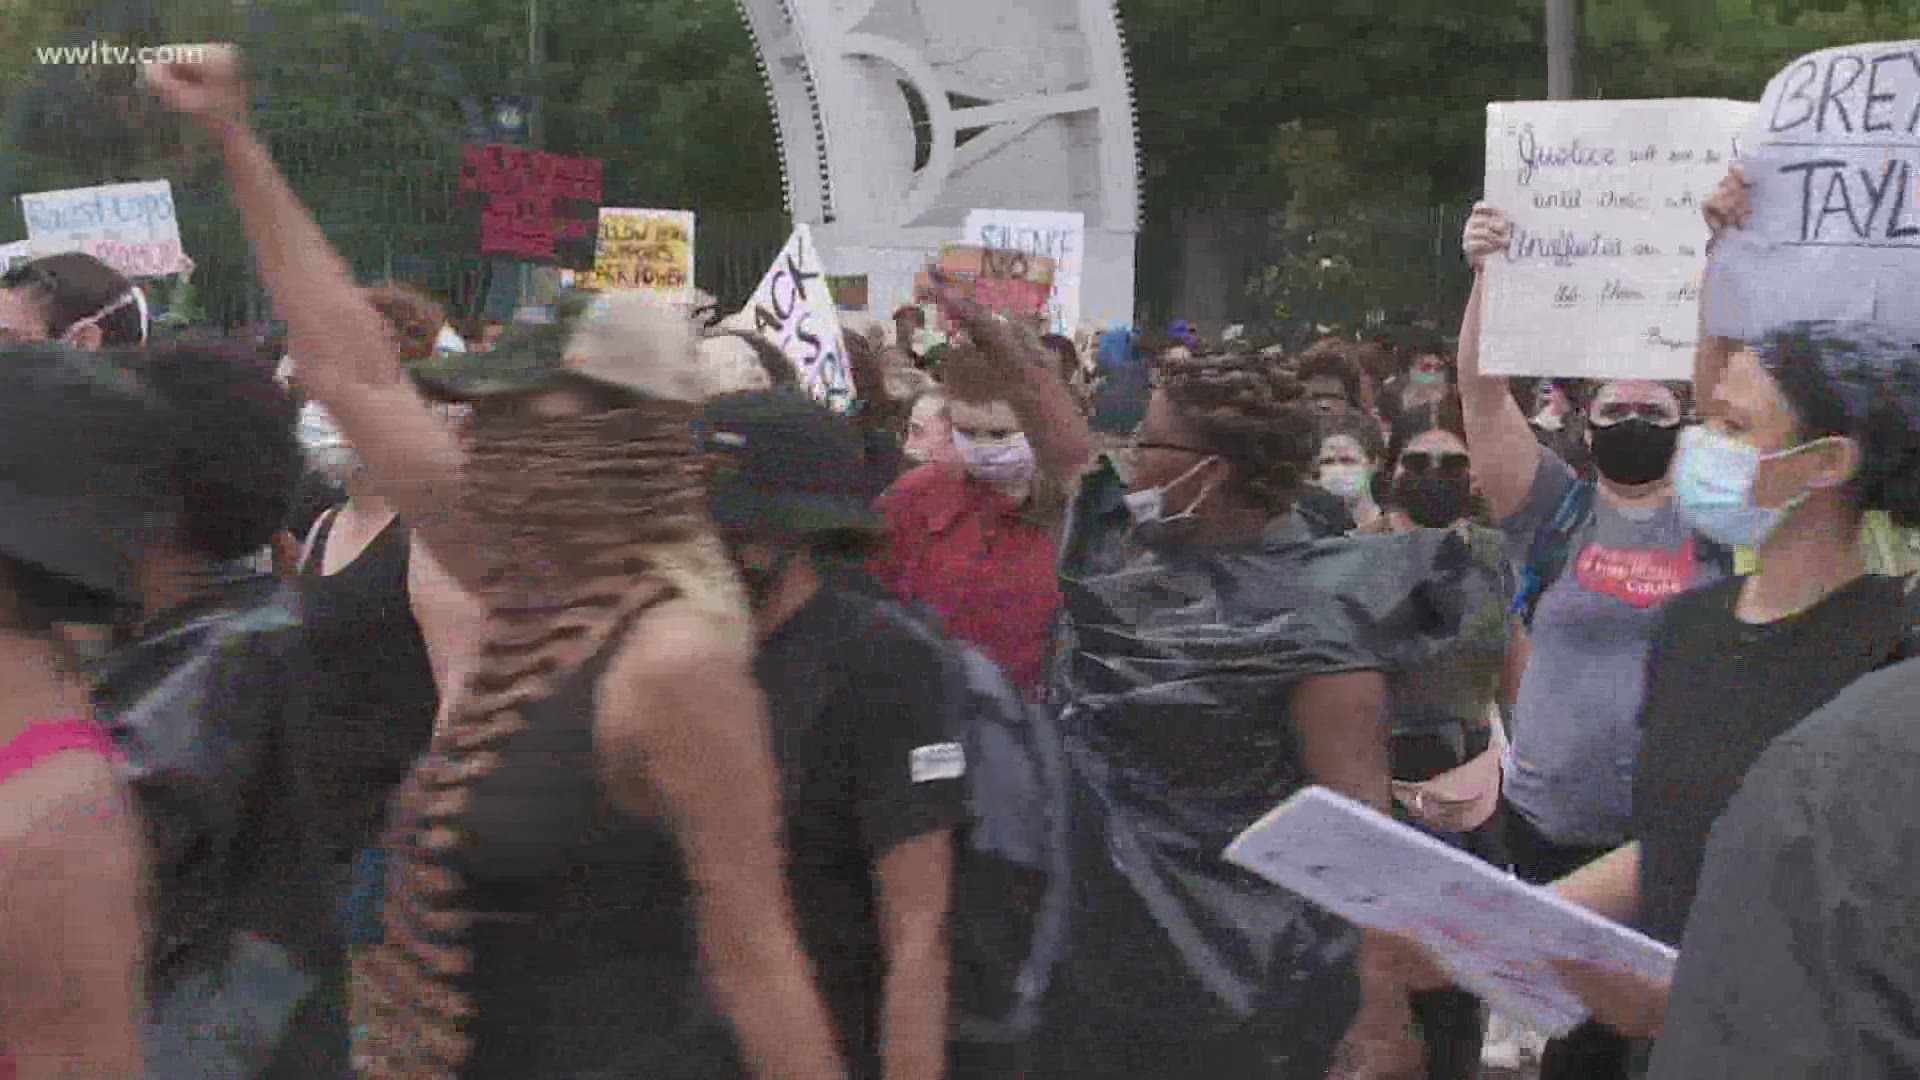 Protesters marched from City Park to the Hard Rock Hotel collapse site despite the rain and the coronavirus pandemic.